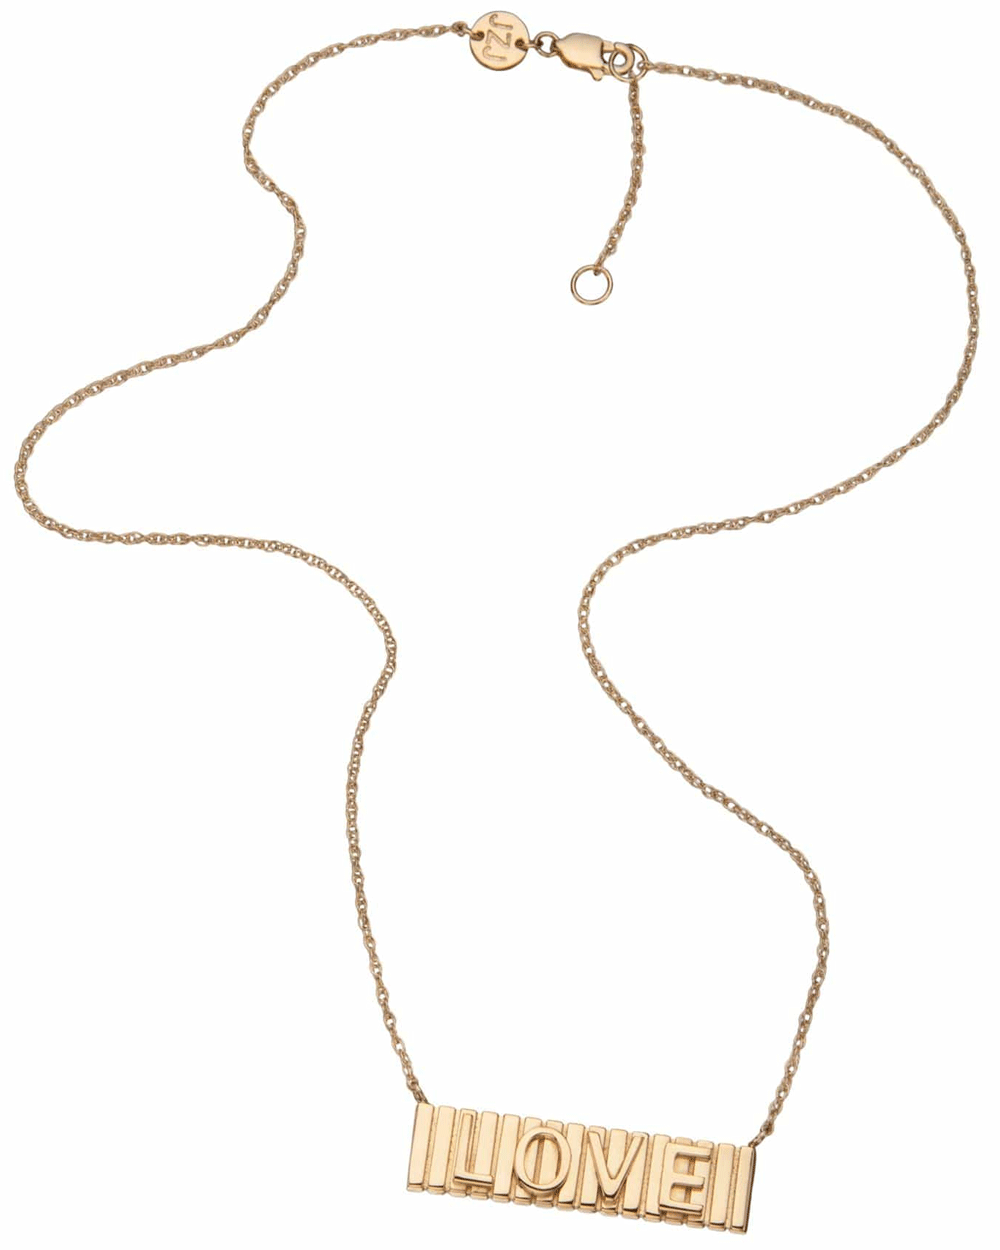 Gold Vermeil Paulina Necklace “Love” on Chain Necklace